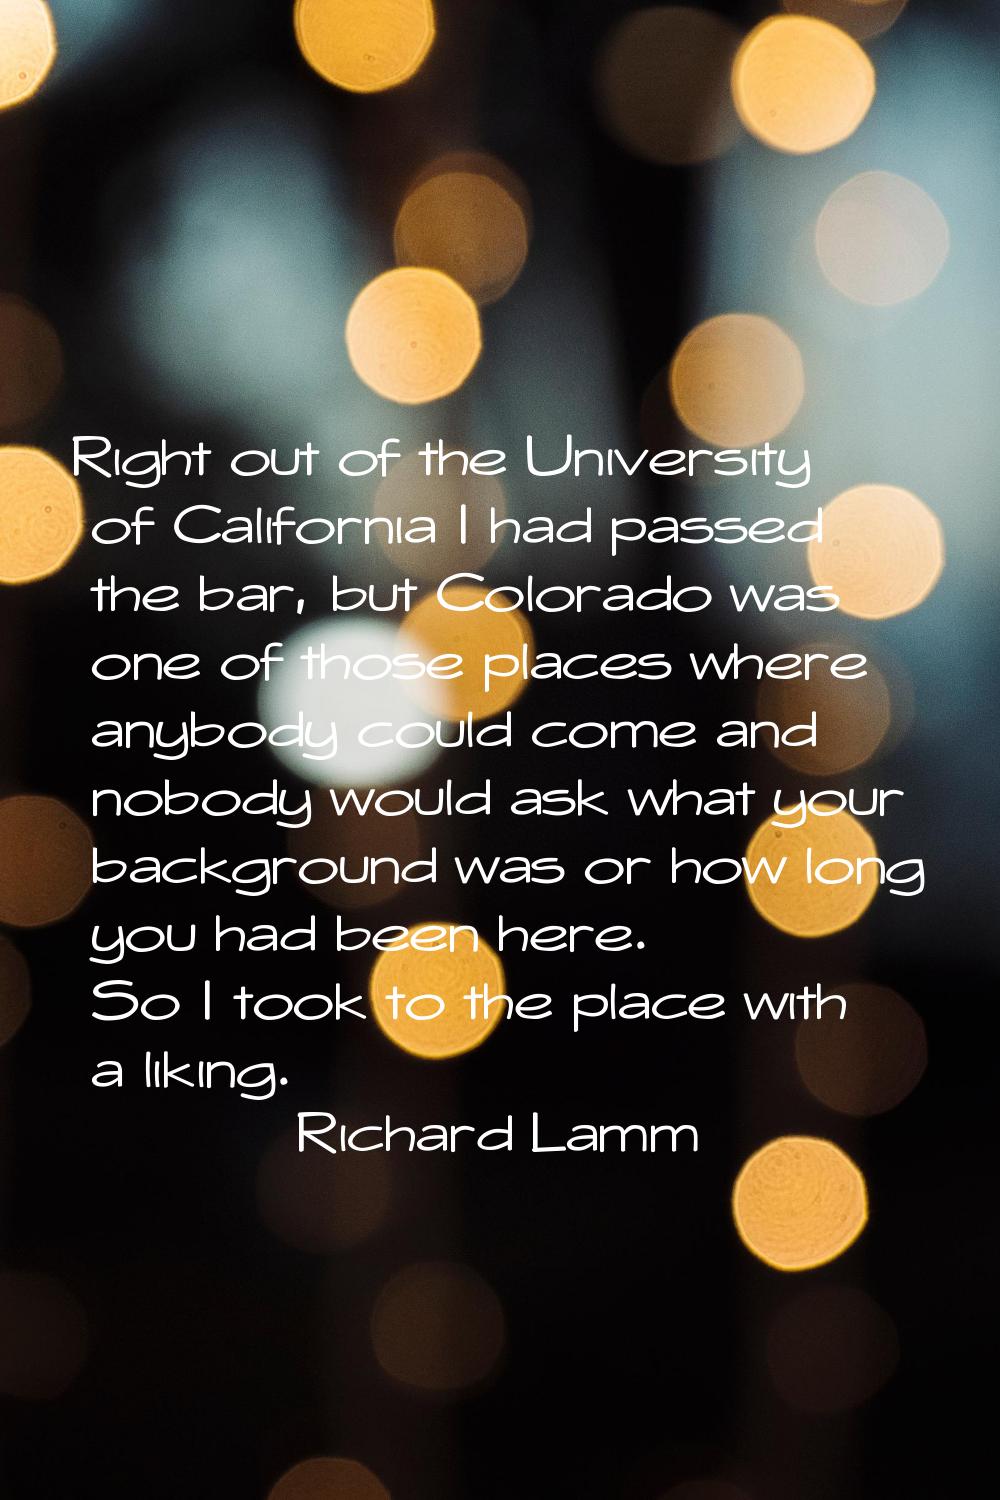 Right out of the University of California I had passed the bar, but Colorado was one of those place